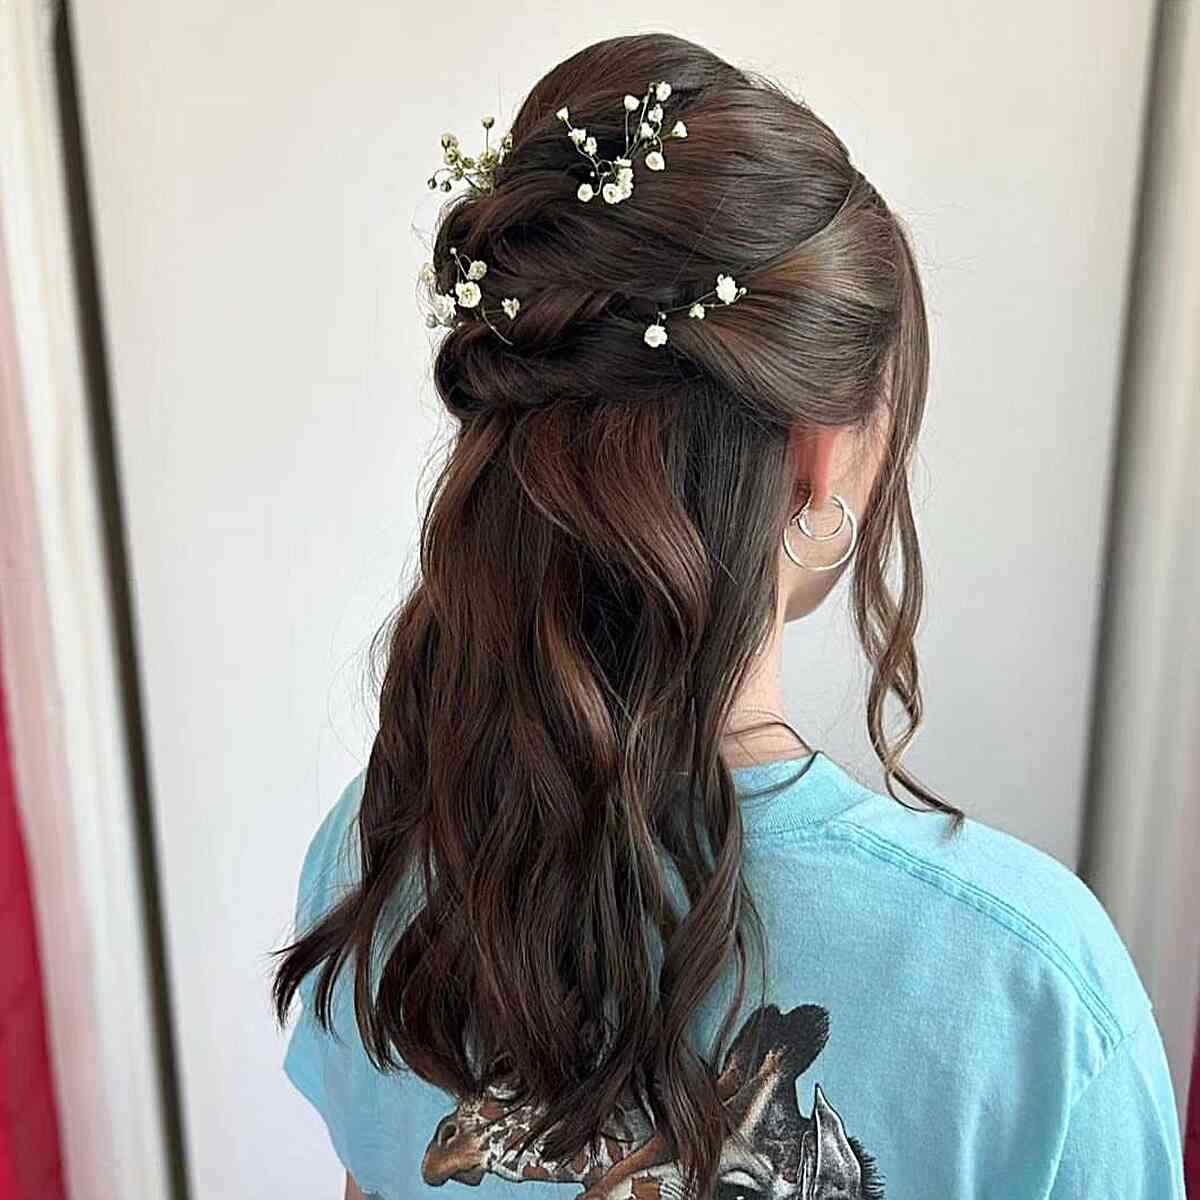 Graduation Wavy Half-Up Hairstyle with Loose Twists and Mini Flowers for Mid-Length Hair